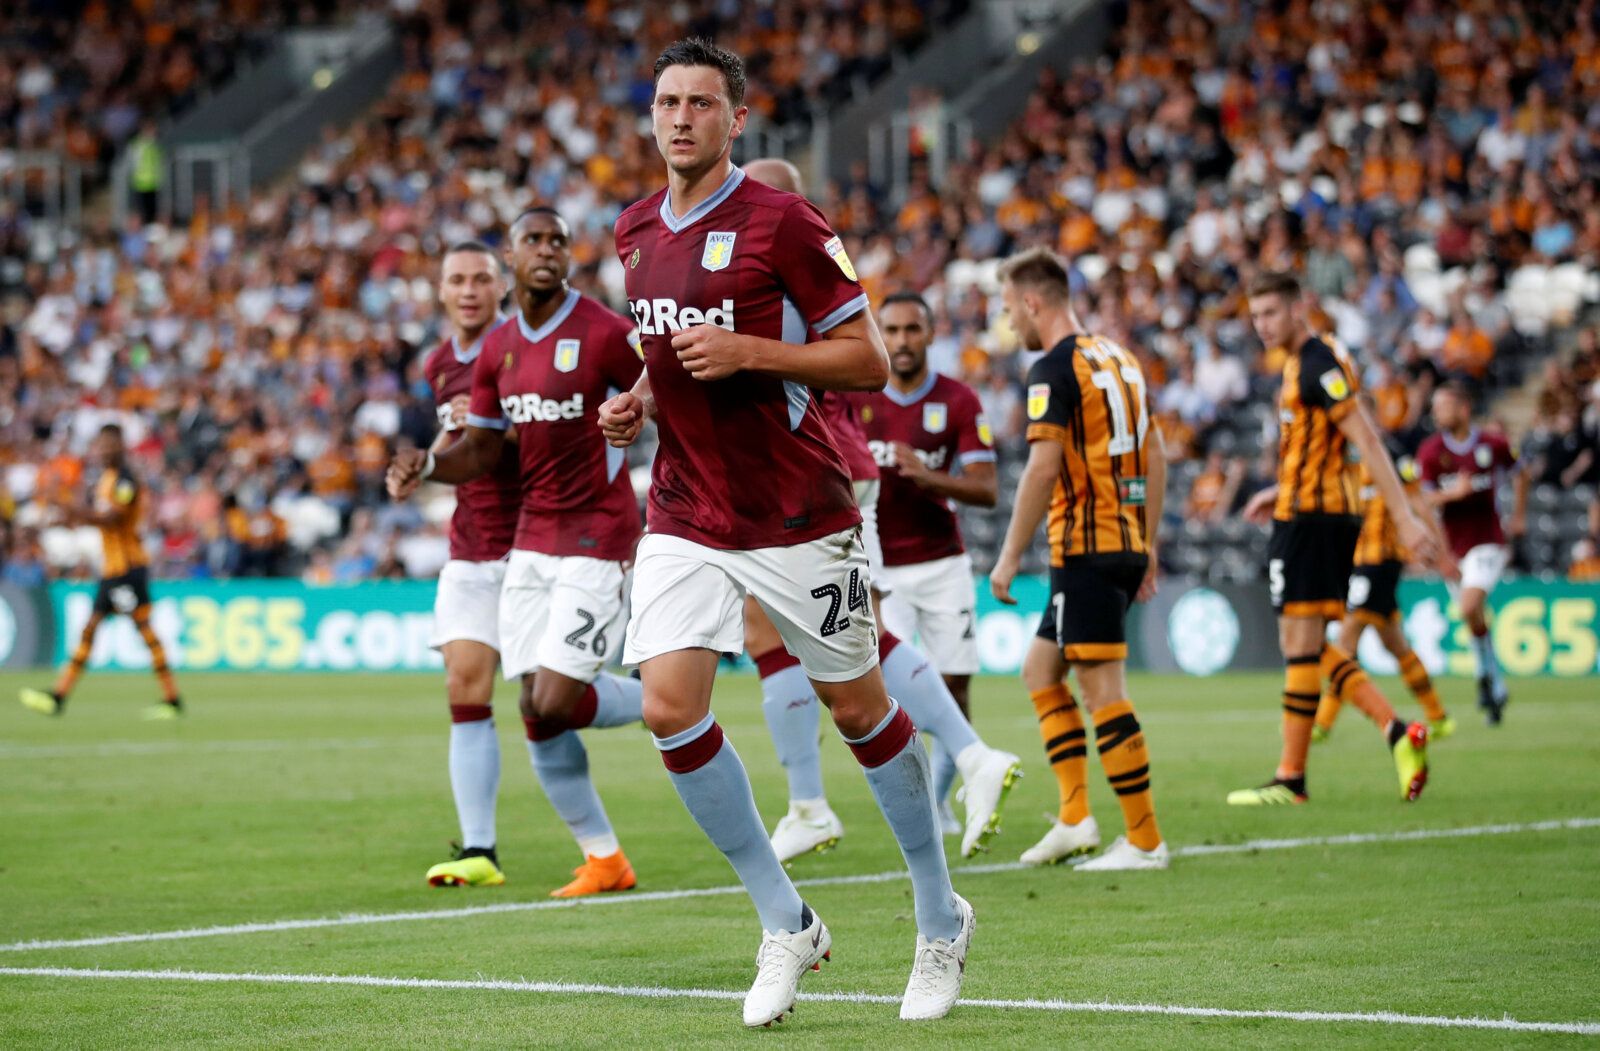 Soccer Football - Championship - Hull City v Aston Villa - KCOM Stadium, Hull, Britain - August 6, 2018   Aston Villa’s Tommy Elphick celebrates scoring their first goal       Action Images/Carl Recine    EDITORIAL USE ONLY. No use with unauthorized audio, video, data, fixture lists, club/league logos or 